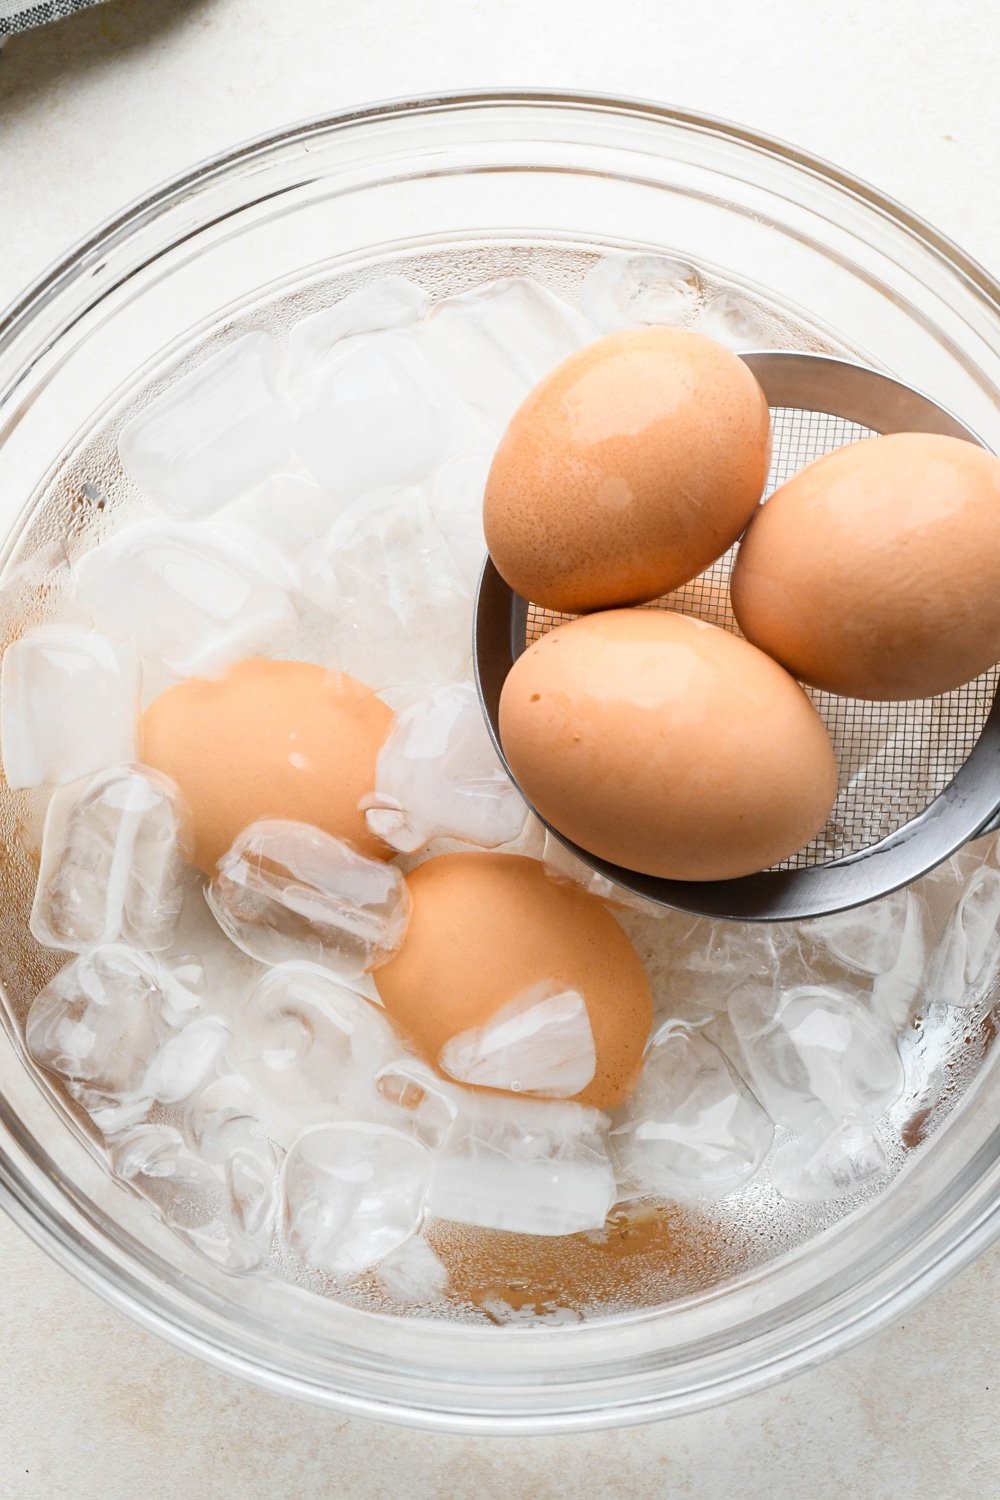 How to make deviled egg salad: Lowering hard boiled eggs into an ice water bath. 